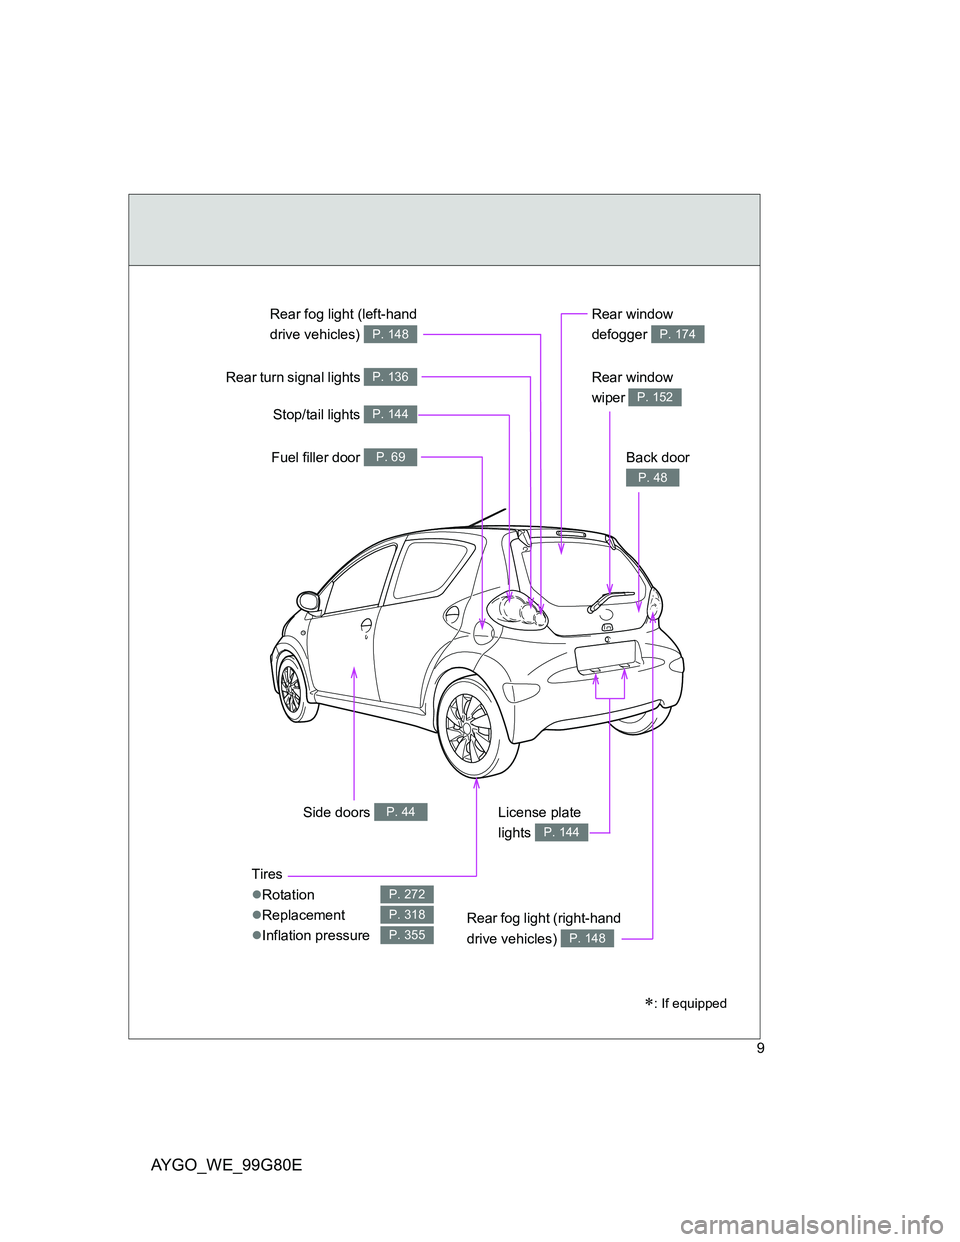 TOYOTA AYGO 2014  Owners Manual (in English) AYGO_WE_99G80E
9
Rear window 
wiper 
P. 152
Tires
Rotation
Replacement
Inflation pressure
P. 272
P. 318
P. 355
Side doors P. 44
Rear window 
defogger 
P. 174
Fuel filler door P. 69
Stop/tail 